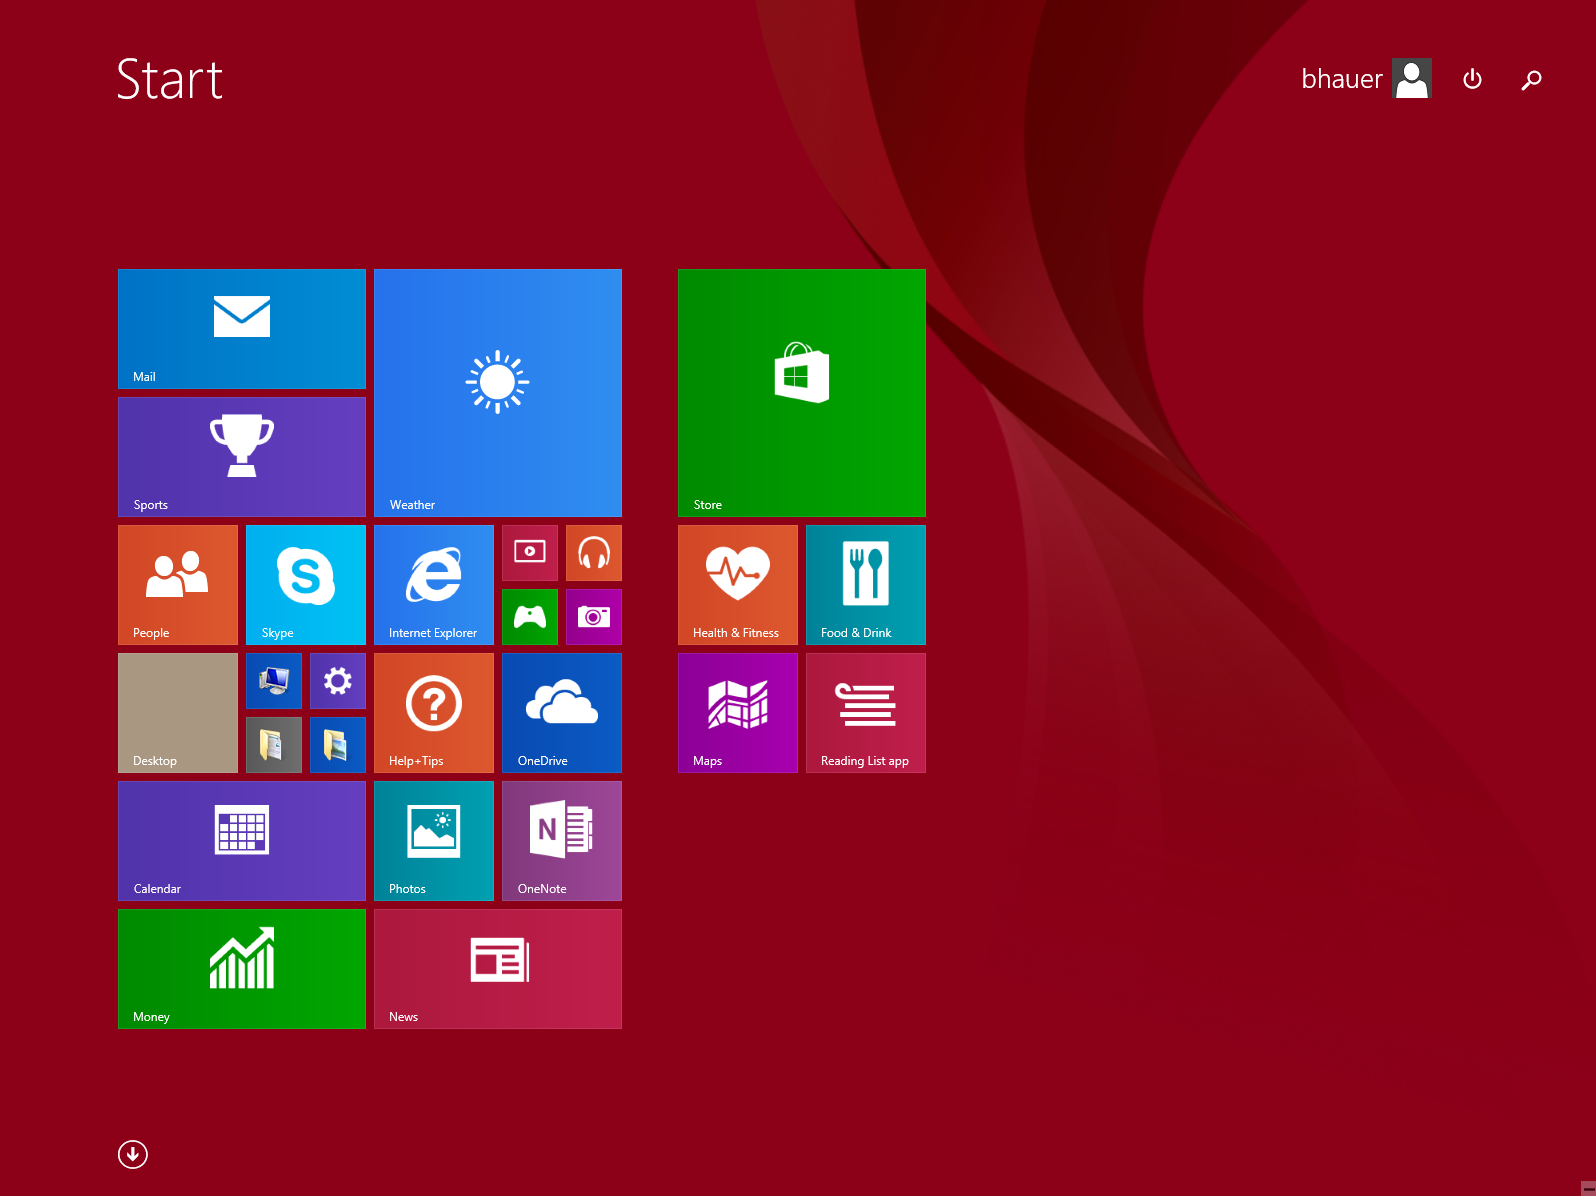 The Start menu of Windows 8 filled the entire monitor, meaning many users preferred to avoid it entirely.